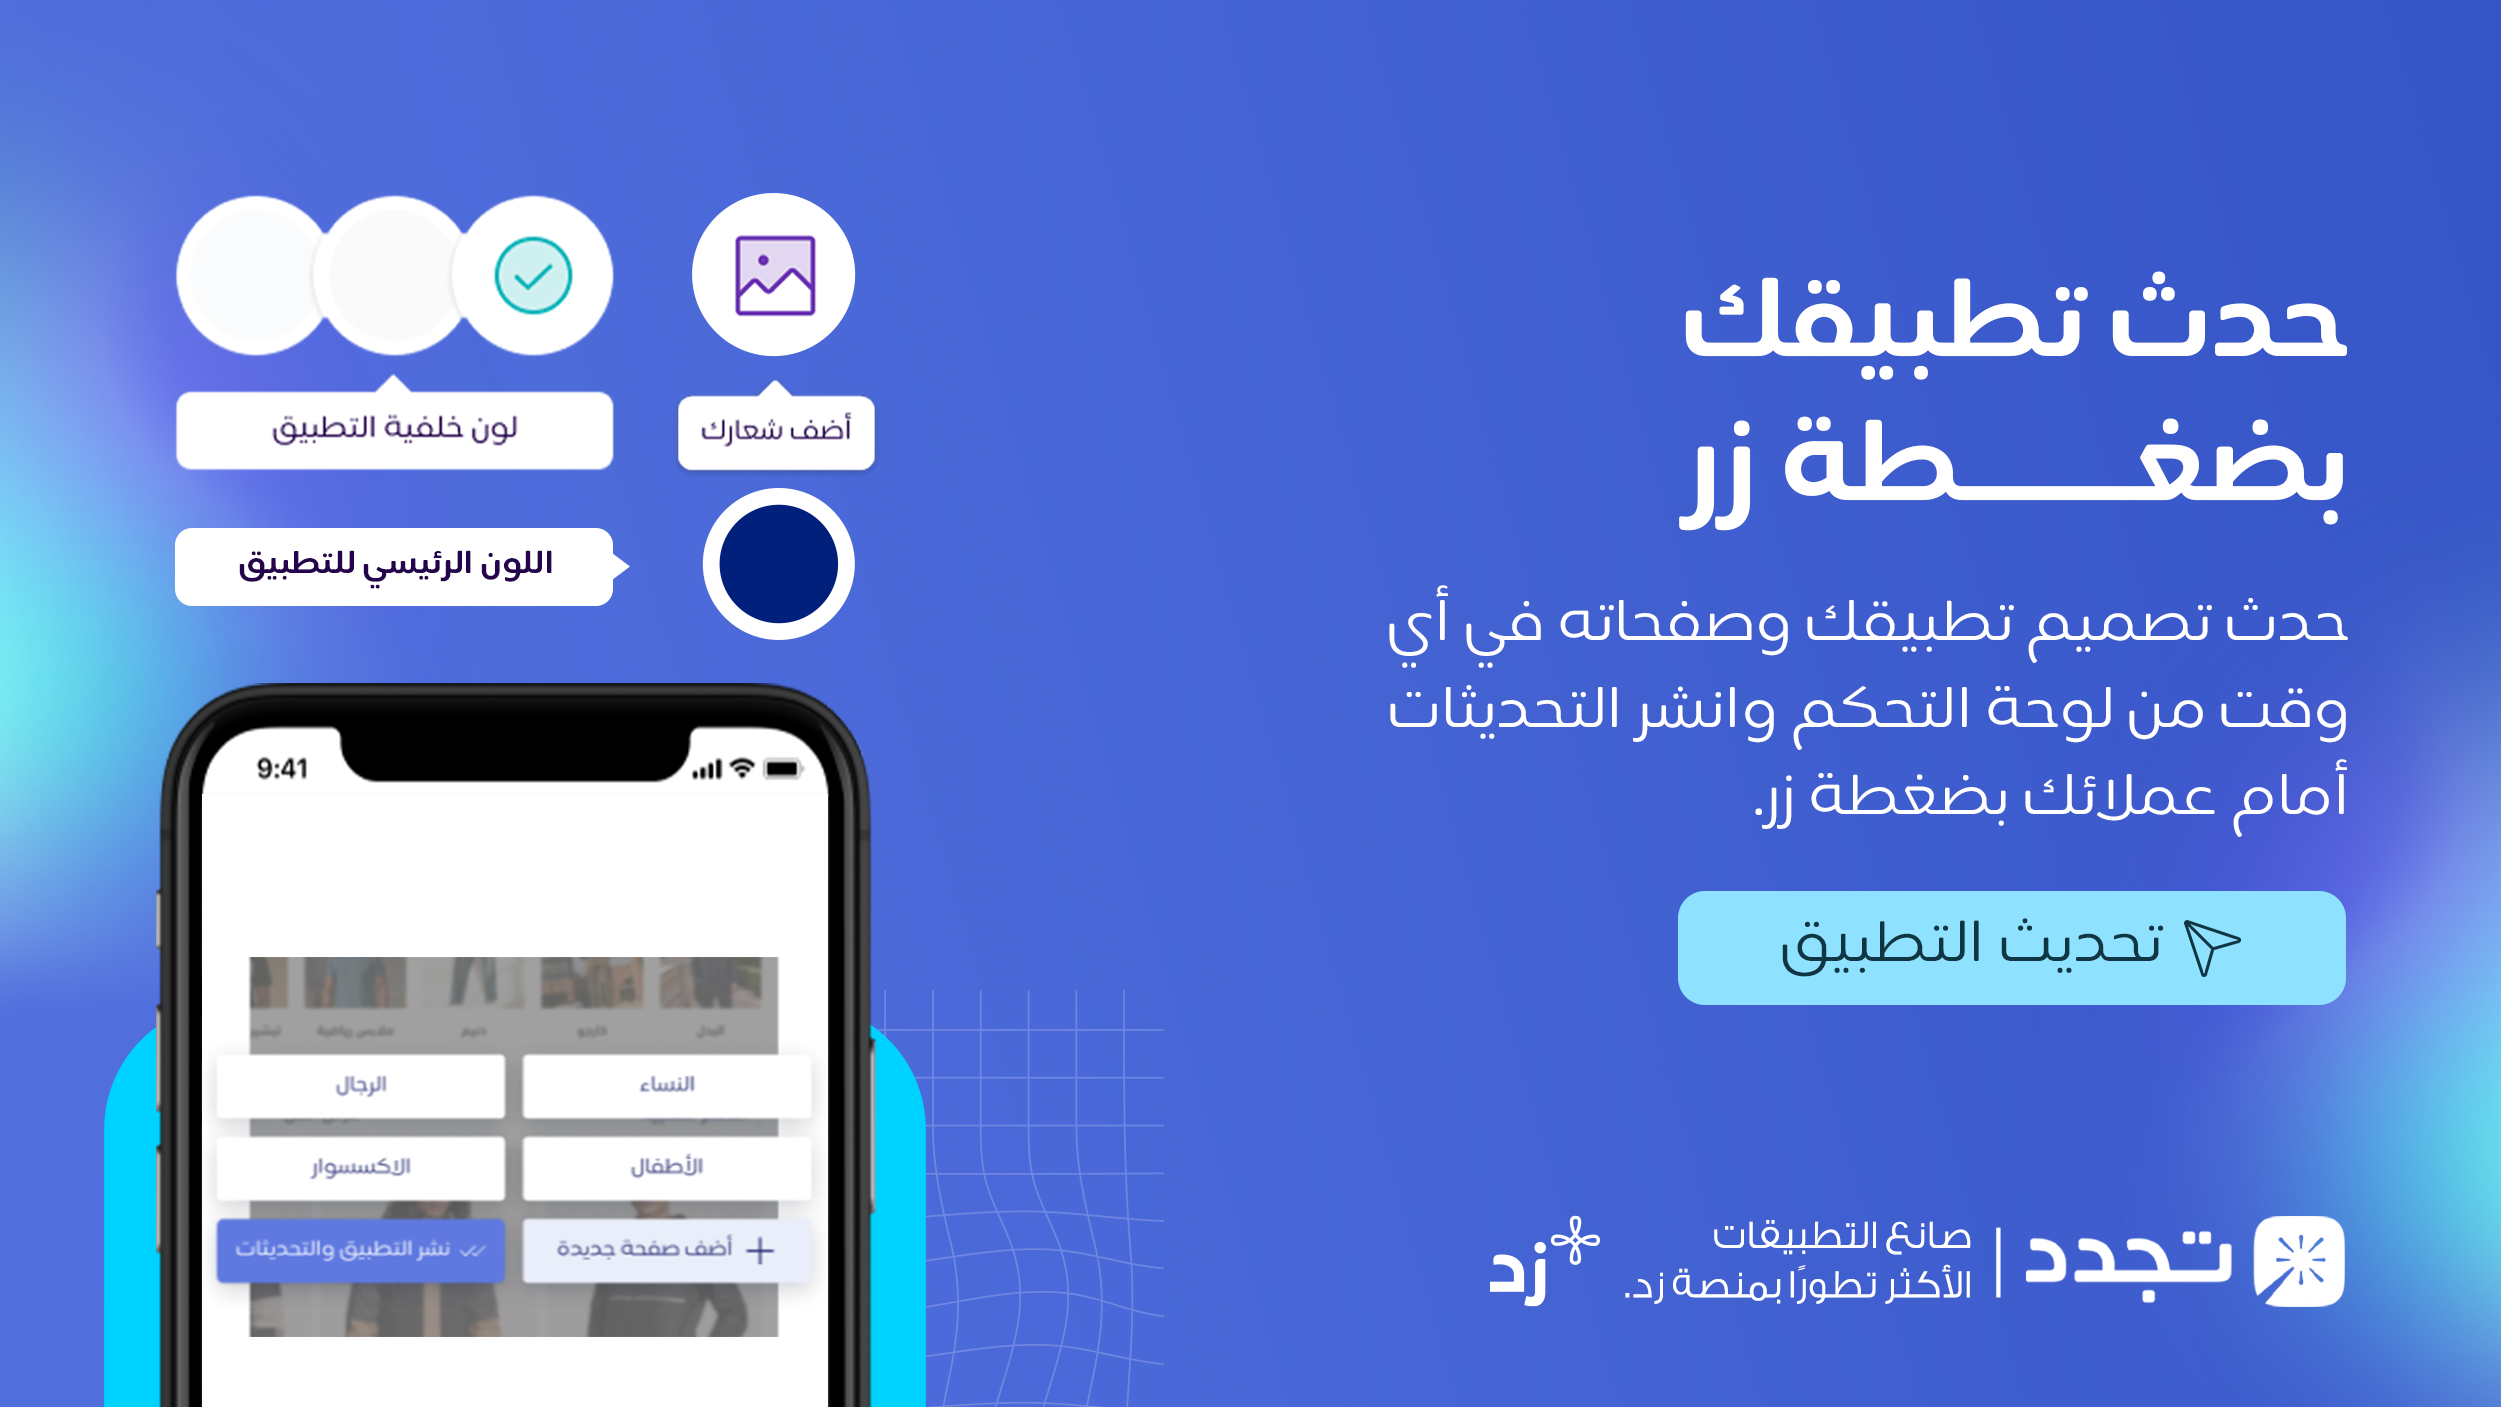 Tajadad enables you to create a mobile app for your store in 10m without tech experience using AI